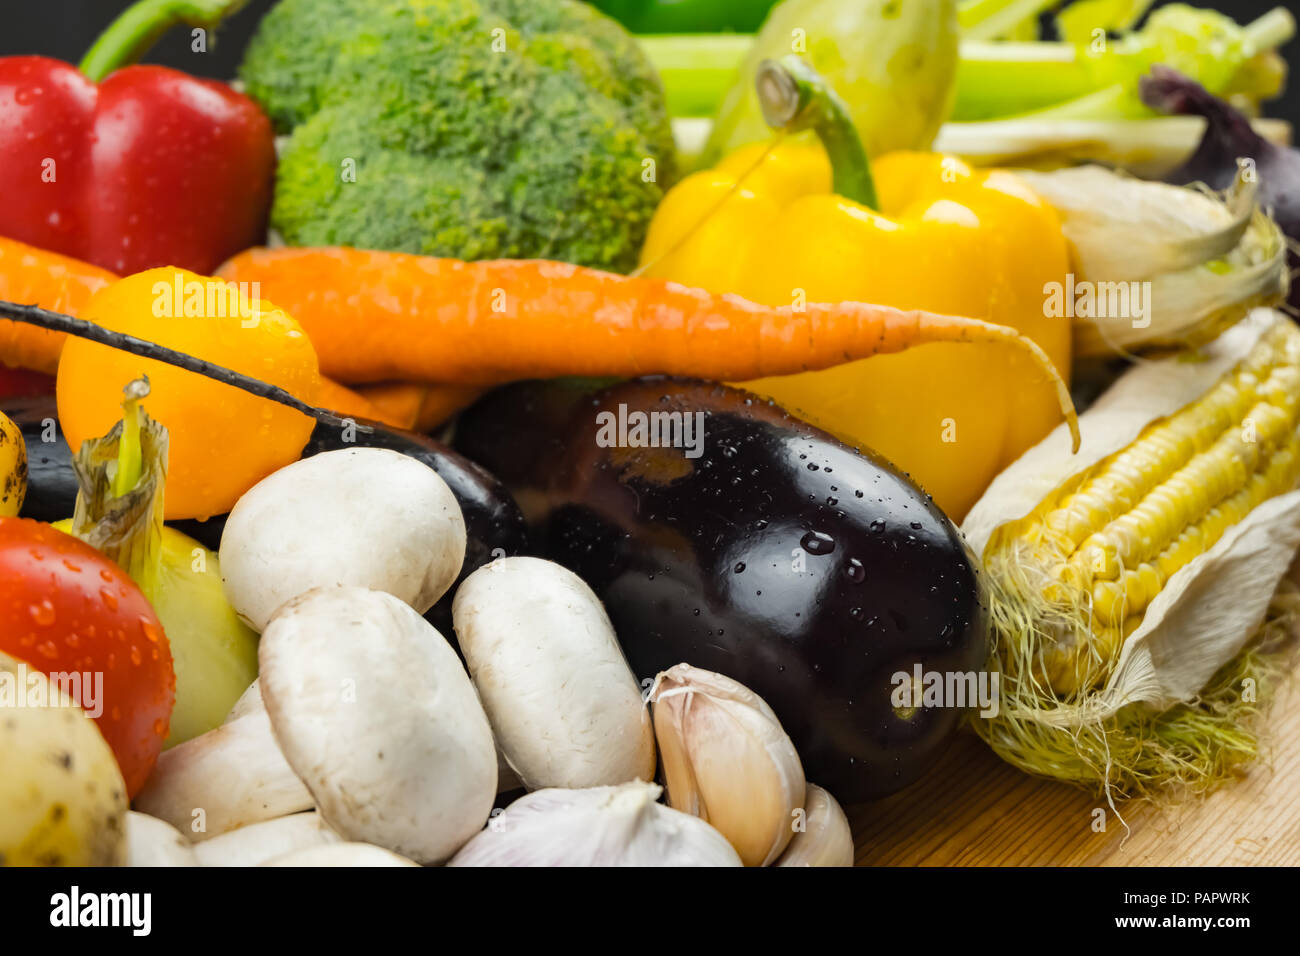 Fresh organic vegetables on rustic wood table, close-up. Rich diversity of locally grown natural vegan food laying on table Stock Photo